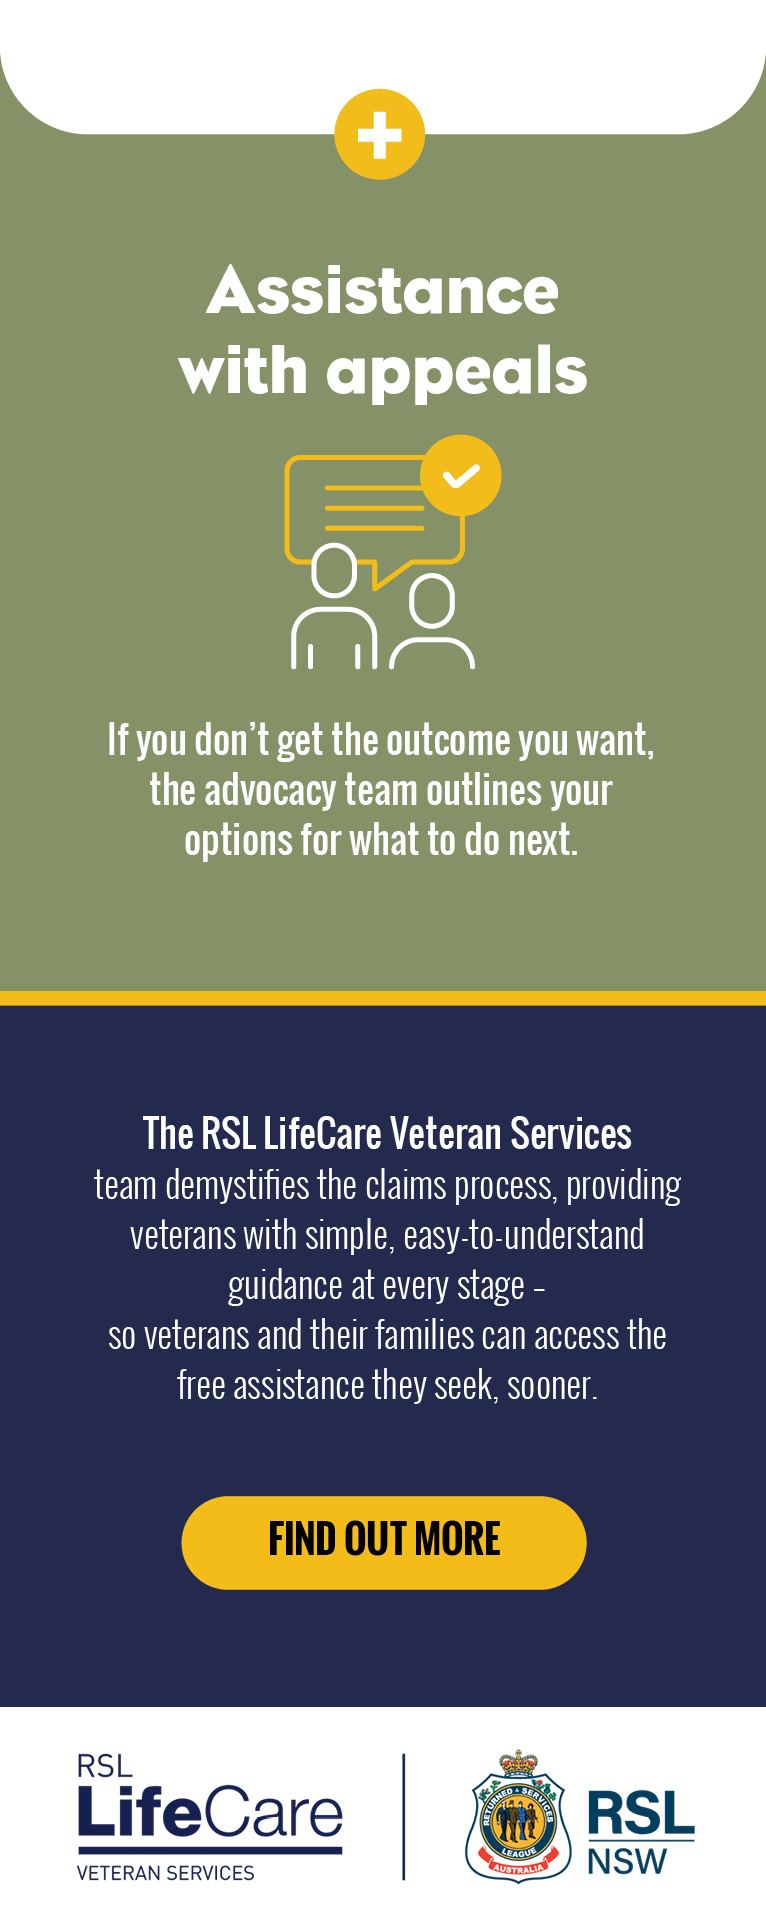 Assistance with appeals. If you don’t get the outcome you want, the advocacy team outlines your options for what to do next. The RSL LifeCare Veteran Services team demystifies the claims process, providing veterans with simple, easy-to-understand guidance at every stage – so veterans and their families can access the free assistance they seek, sooner.